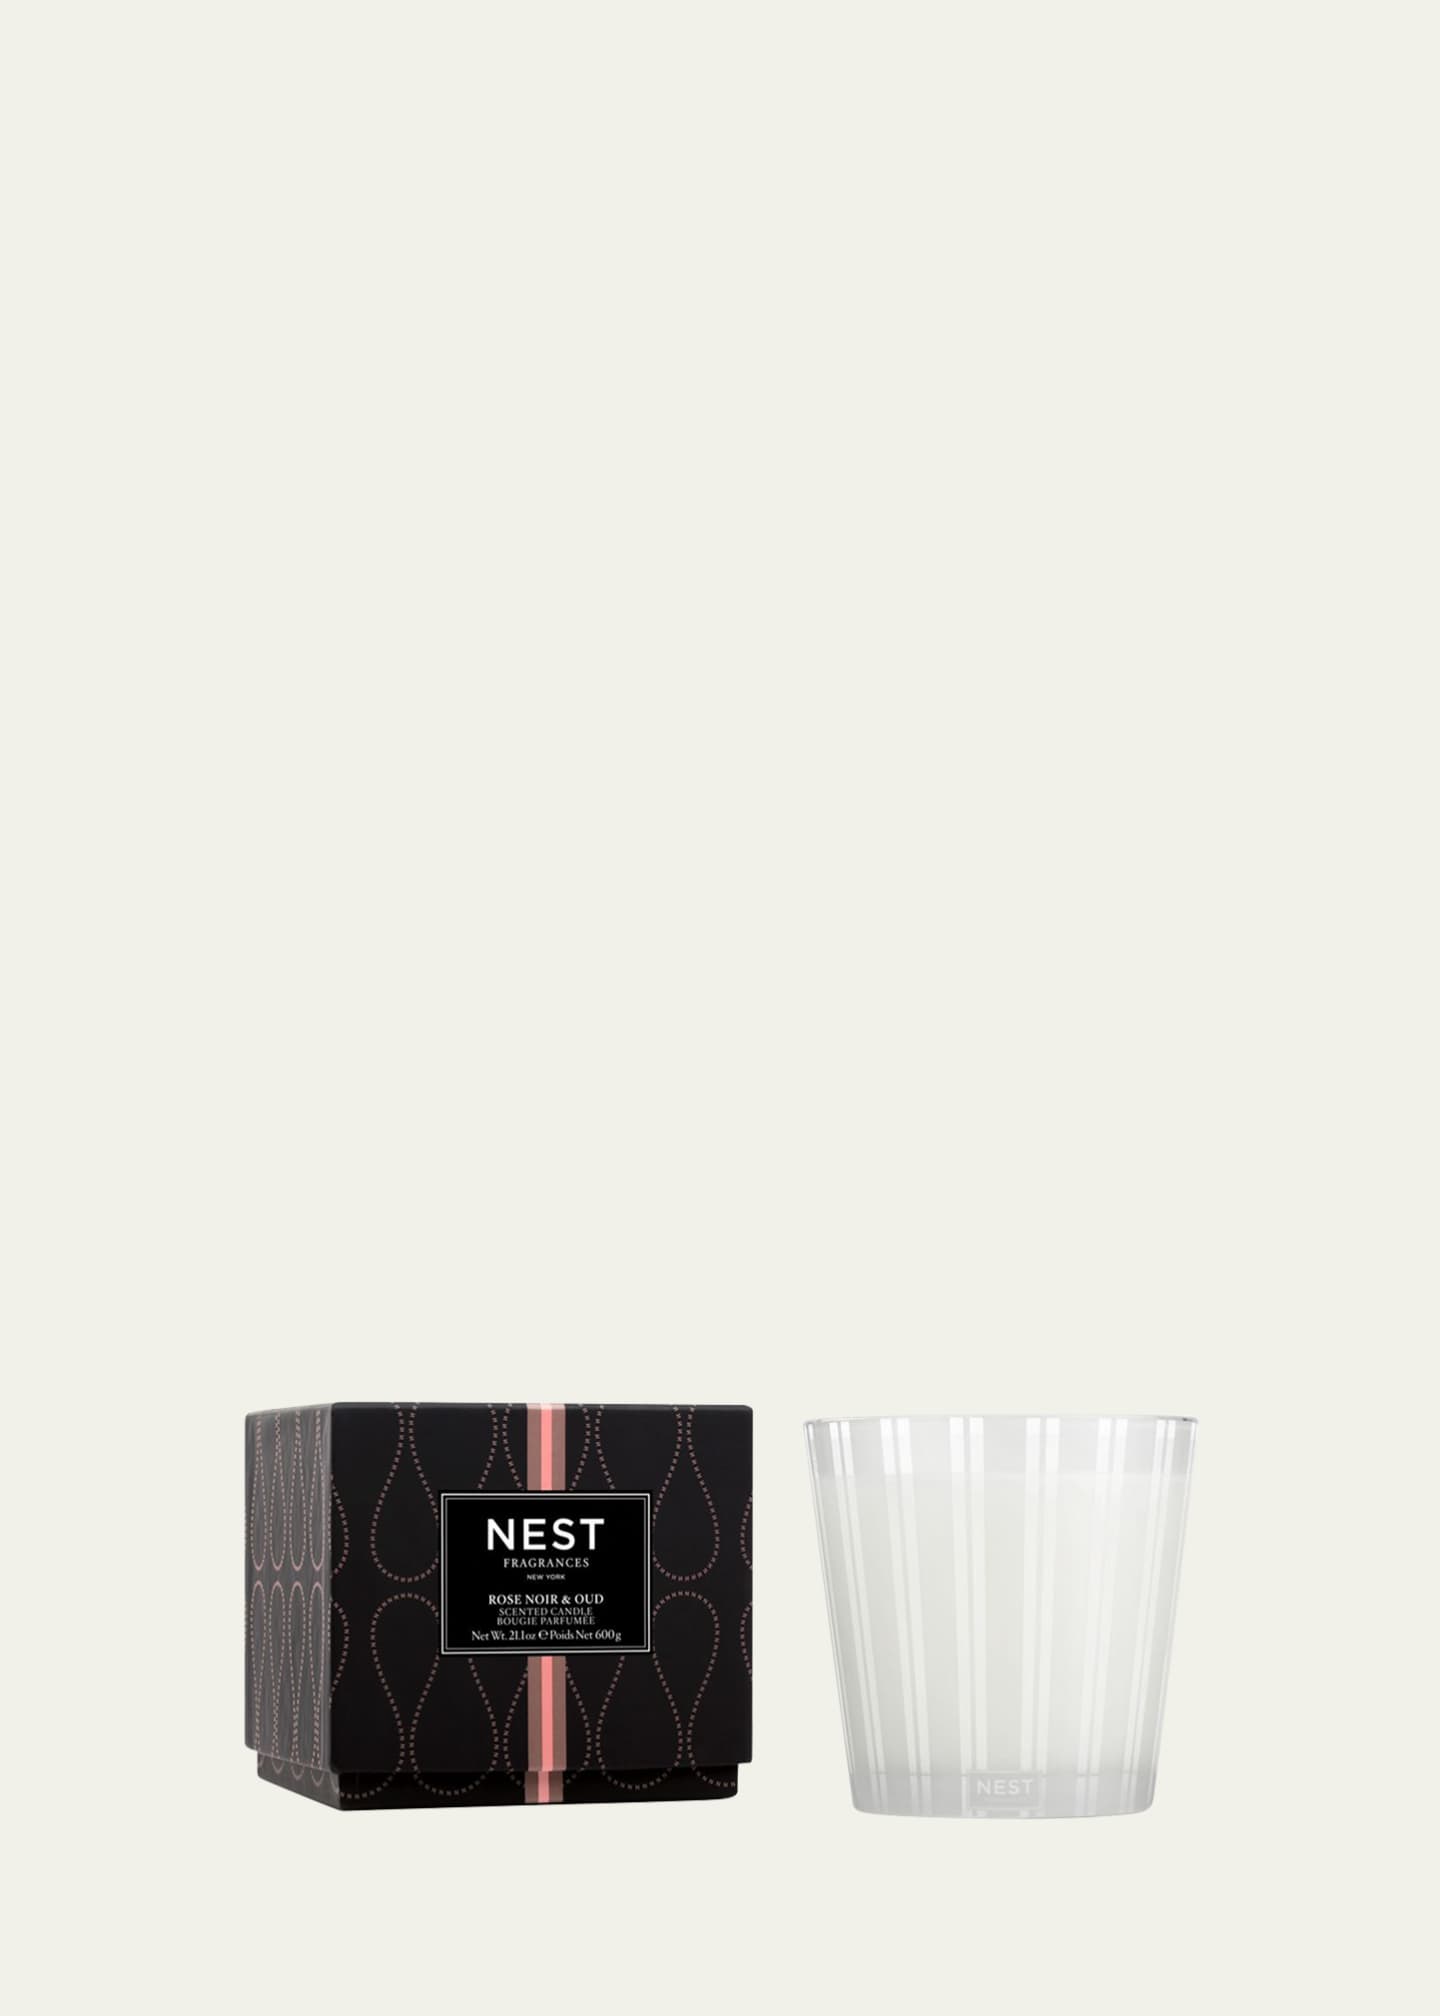 NEST New York 21.1 oz. Rose Noir & Oud 3-Wick Candle Image 1 of 5